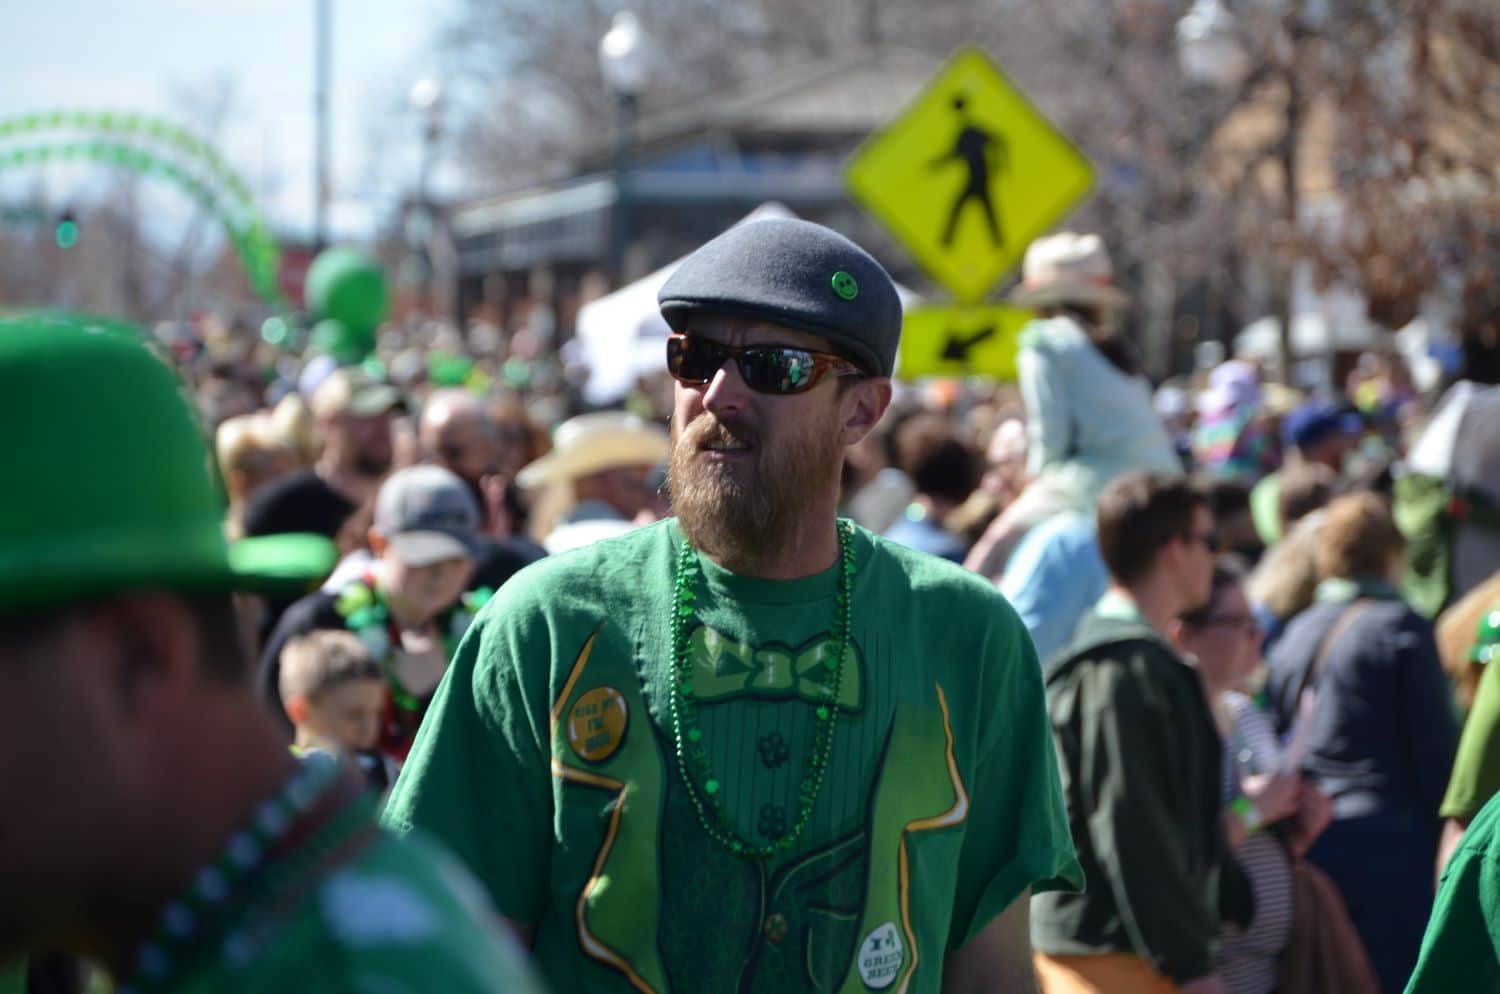 A red-haired man in sunglasses and a bright green t-shirts stands in a packed crowd in downtown Greeley, Colorado